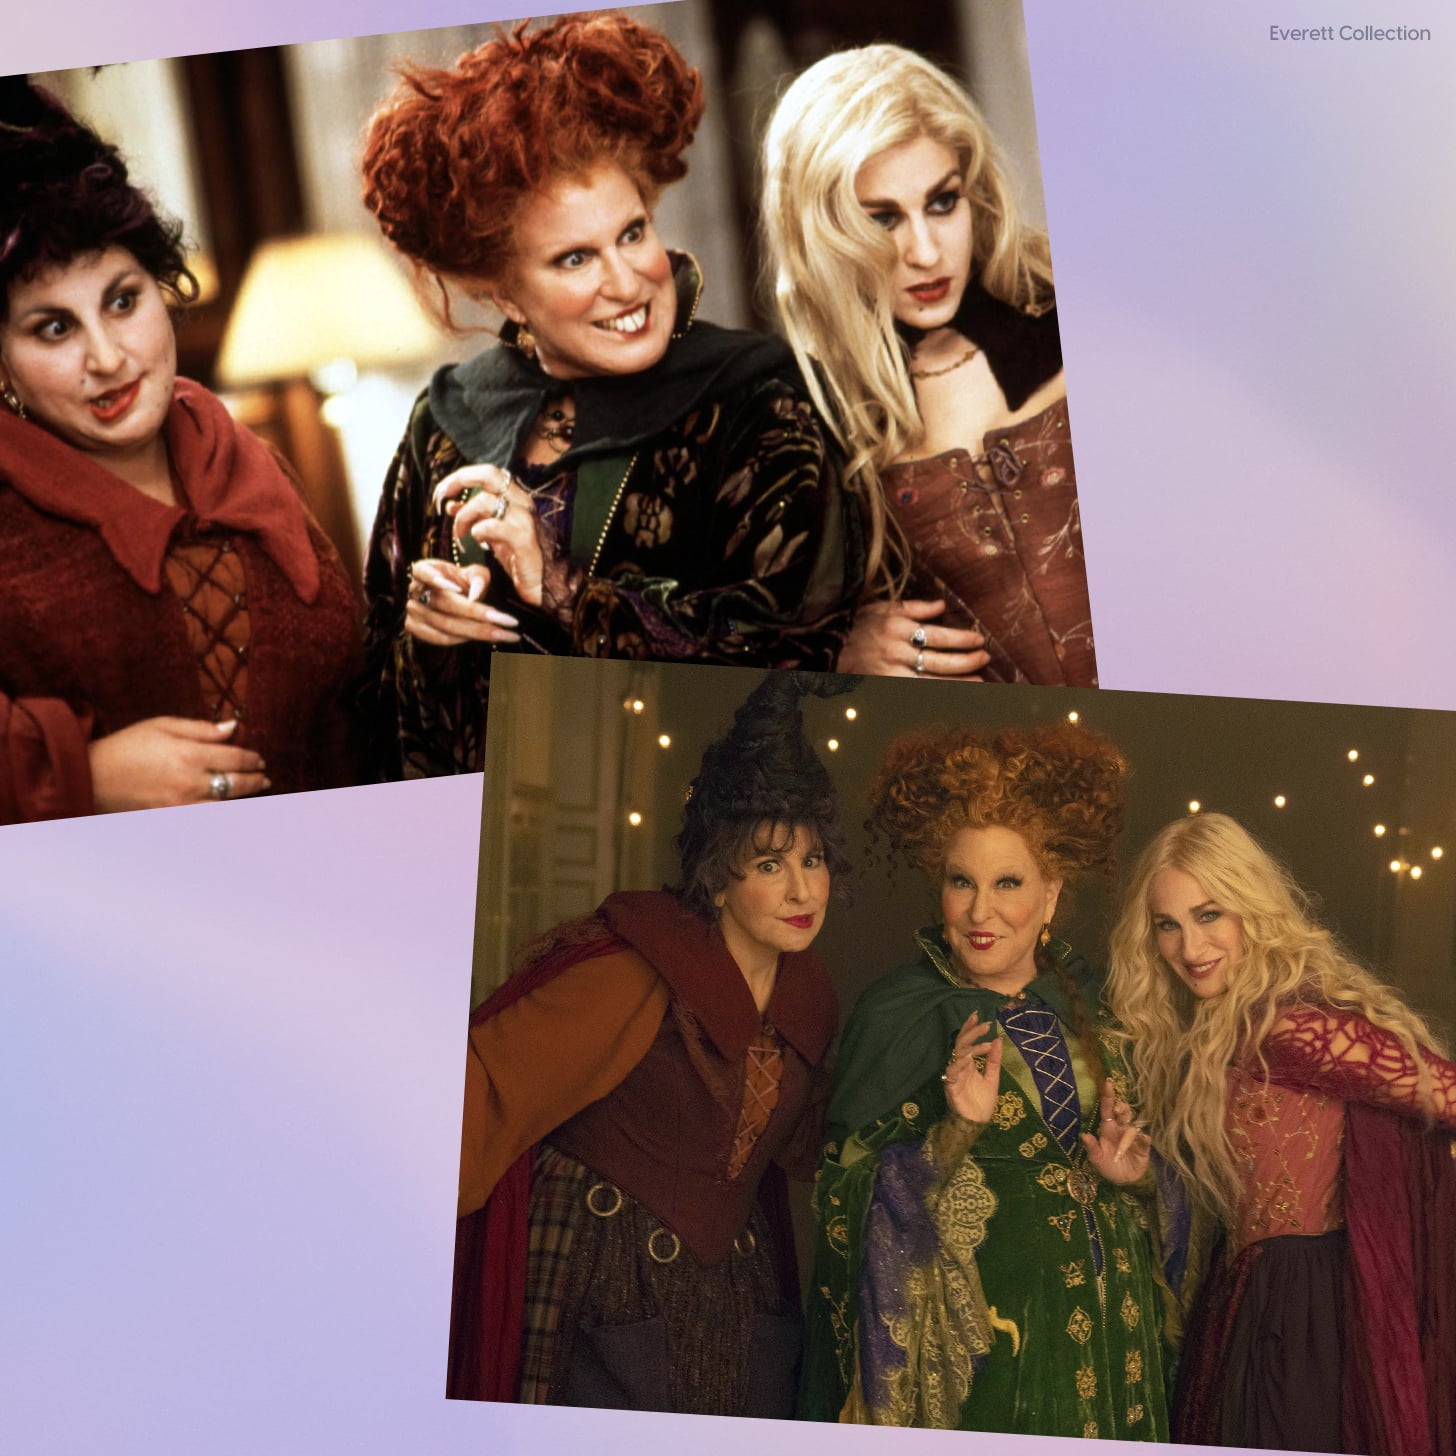 Hocus Pocus: How Old Are The Sanderson Sisters In The Movies?